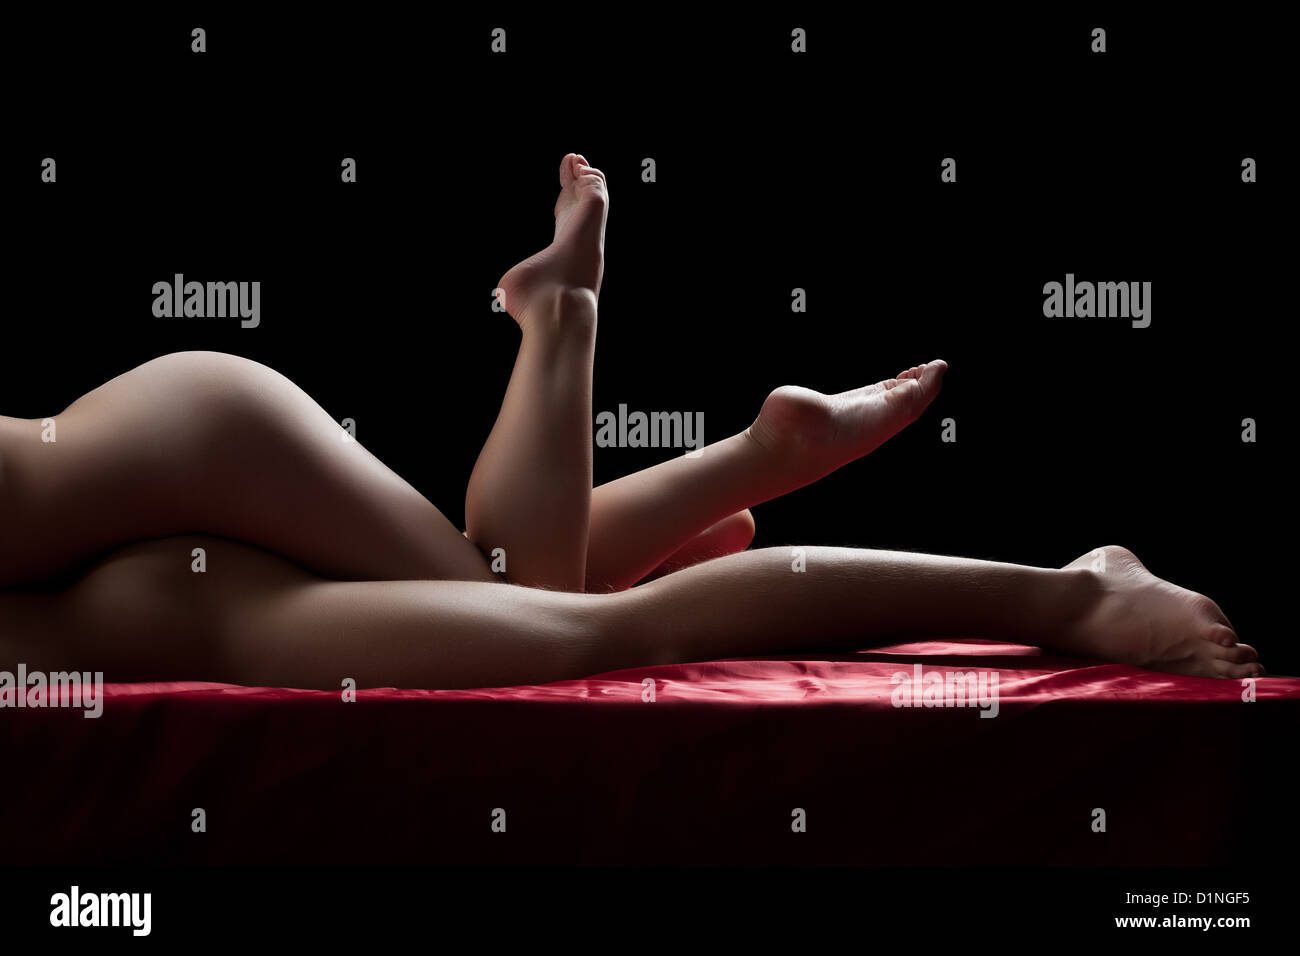 Sexy legs of couple having sex on red sheet Stock Photo